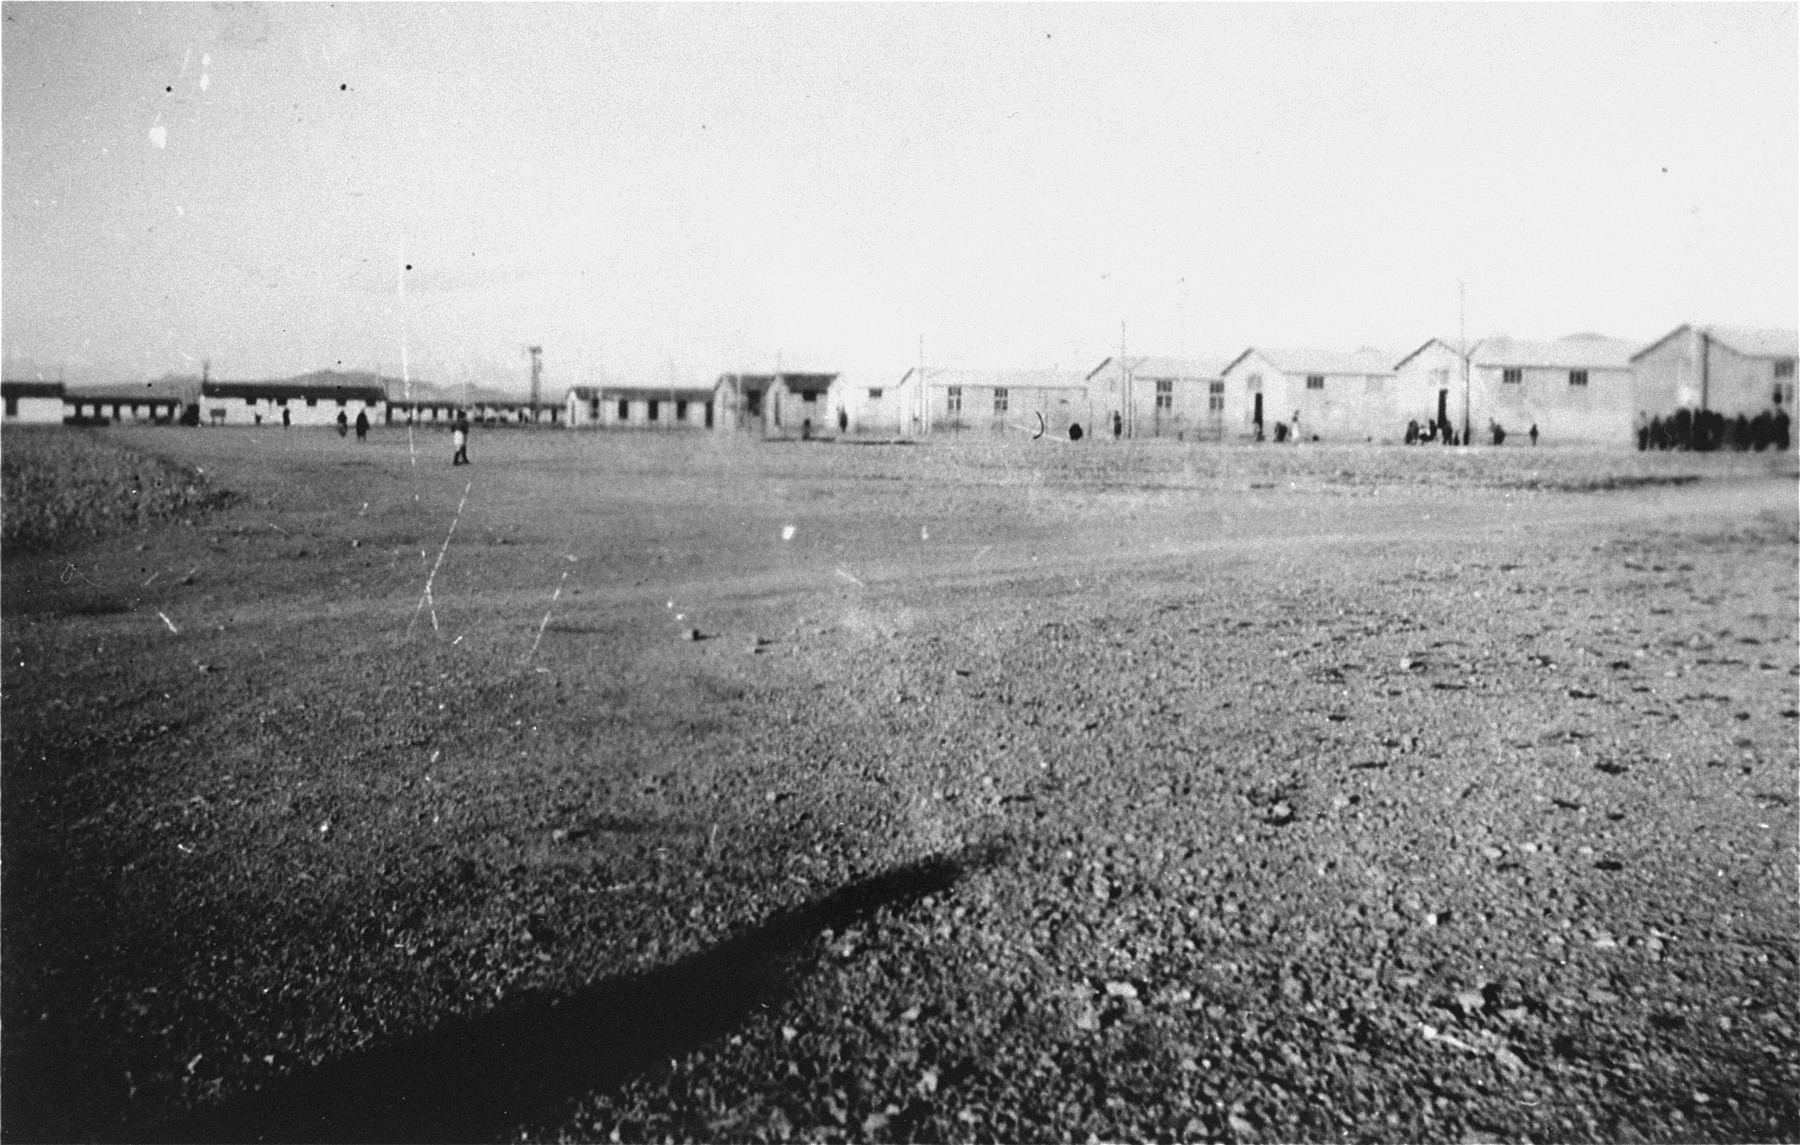 A section of the Rivesaltes transit camp.